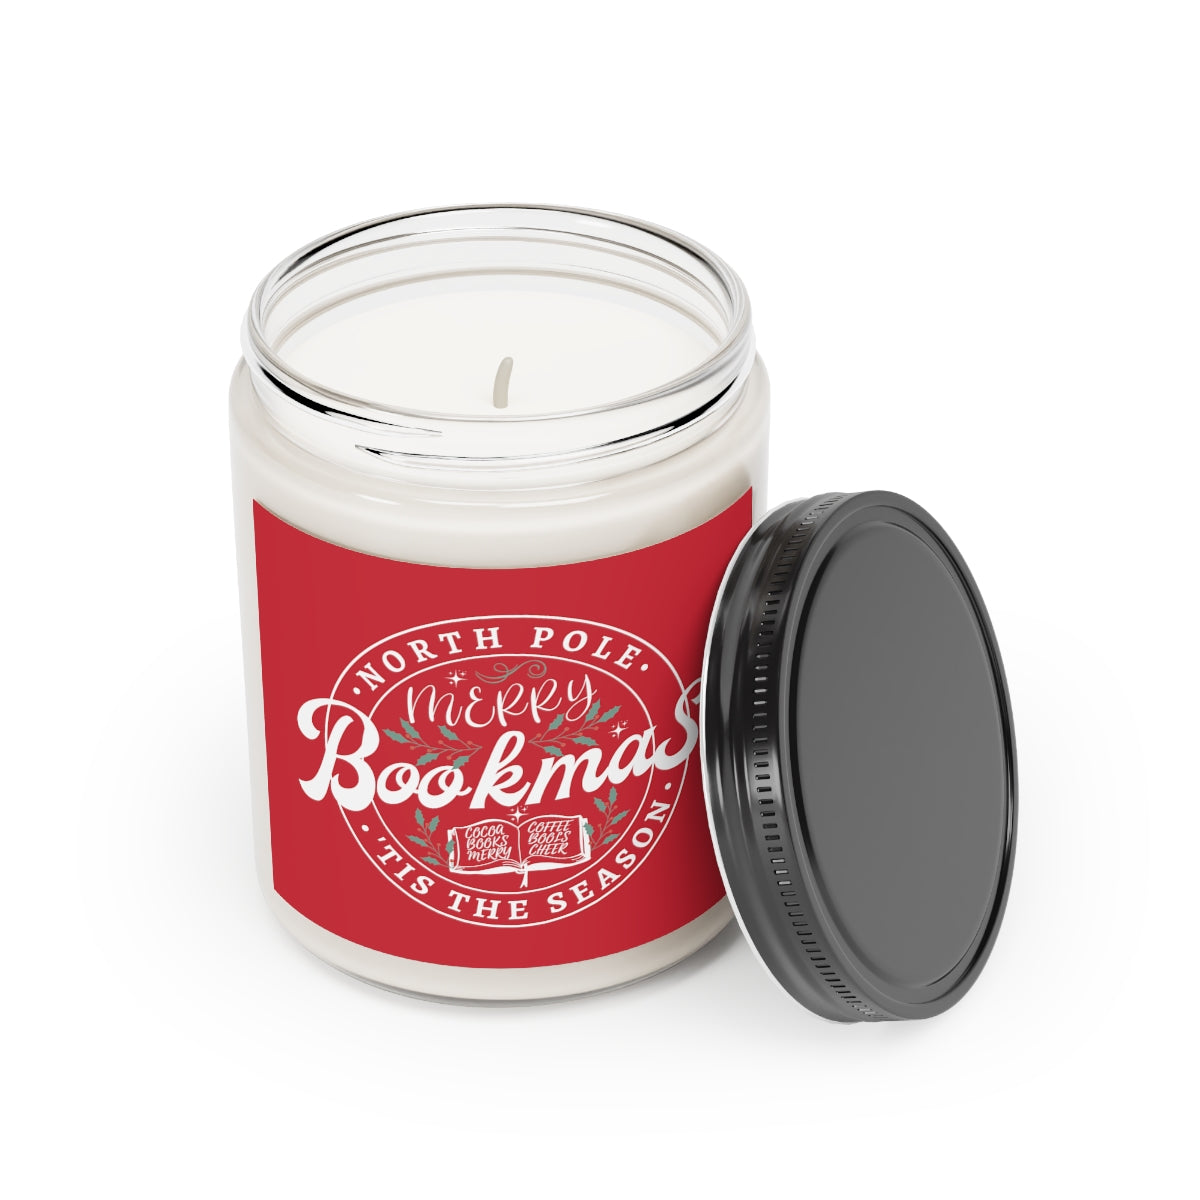 Bookmas Scented Candle, 9oz